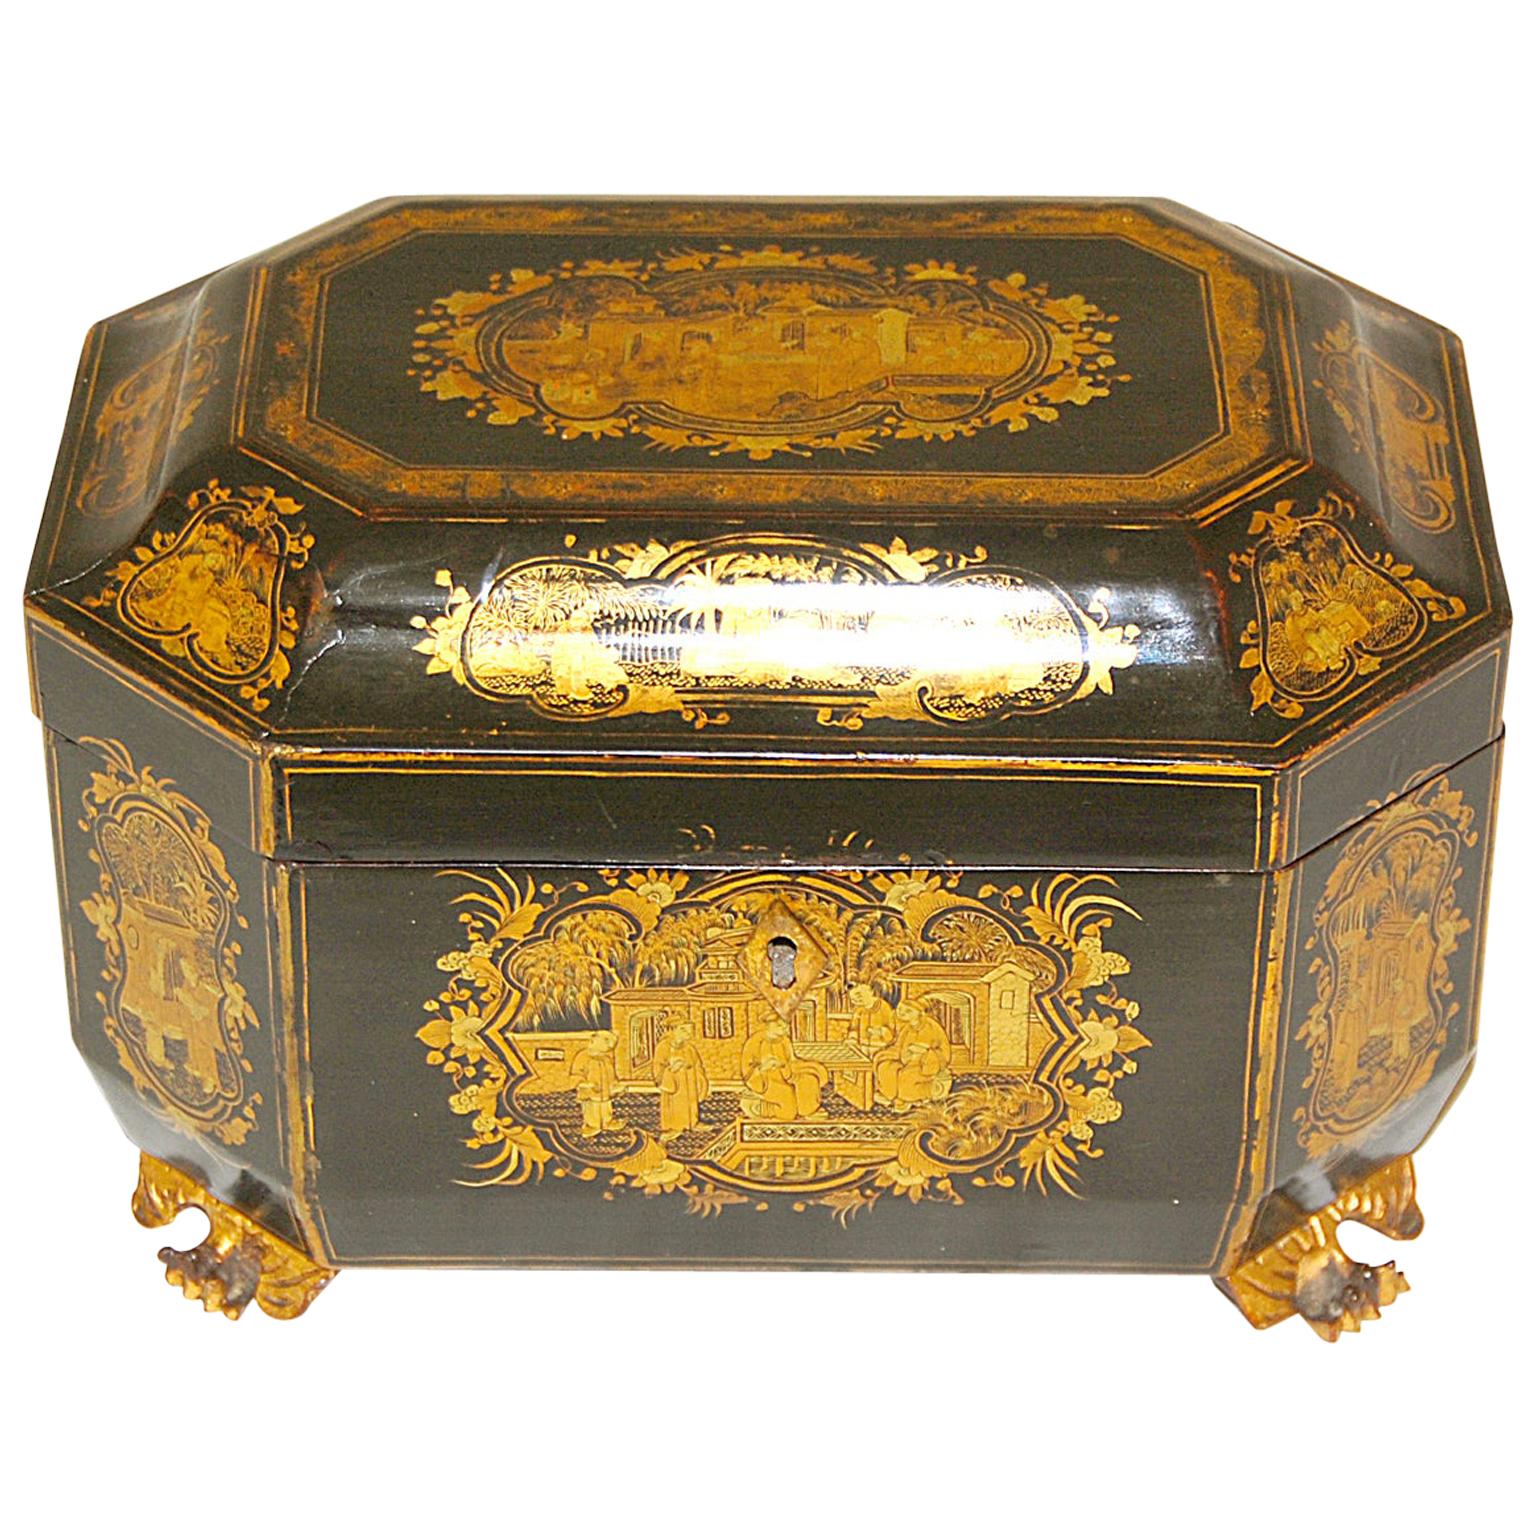 Chinese Export Early 19th Century Chinoiserie Teacaddy with Pewter Tea Boxes For Sale